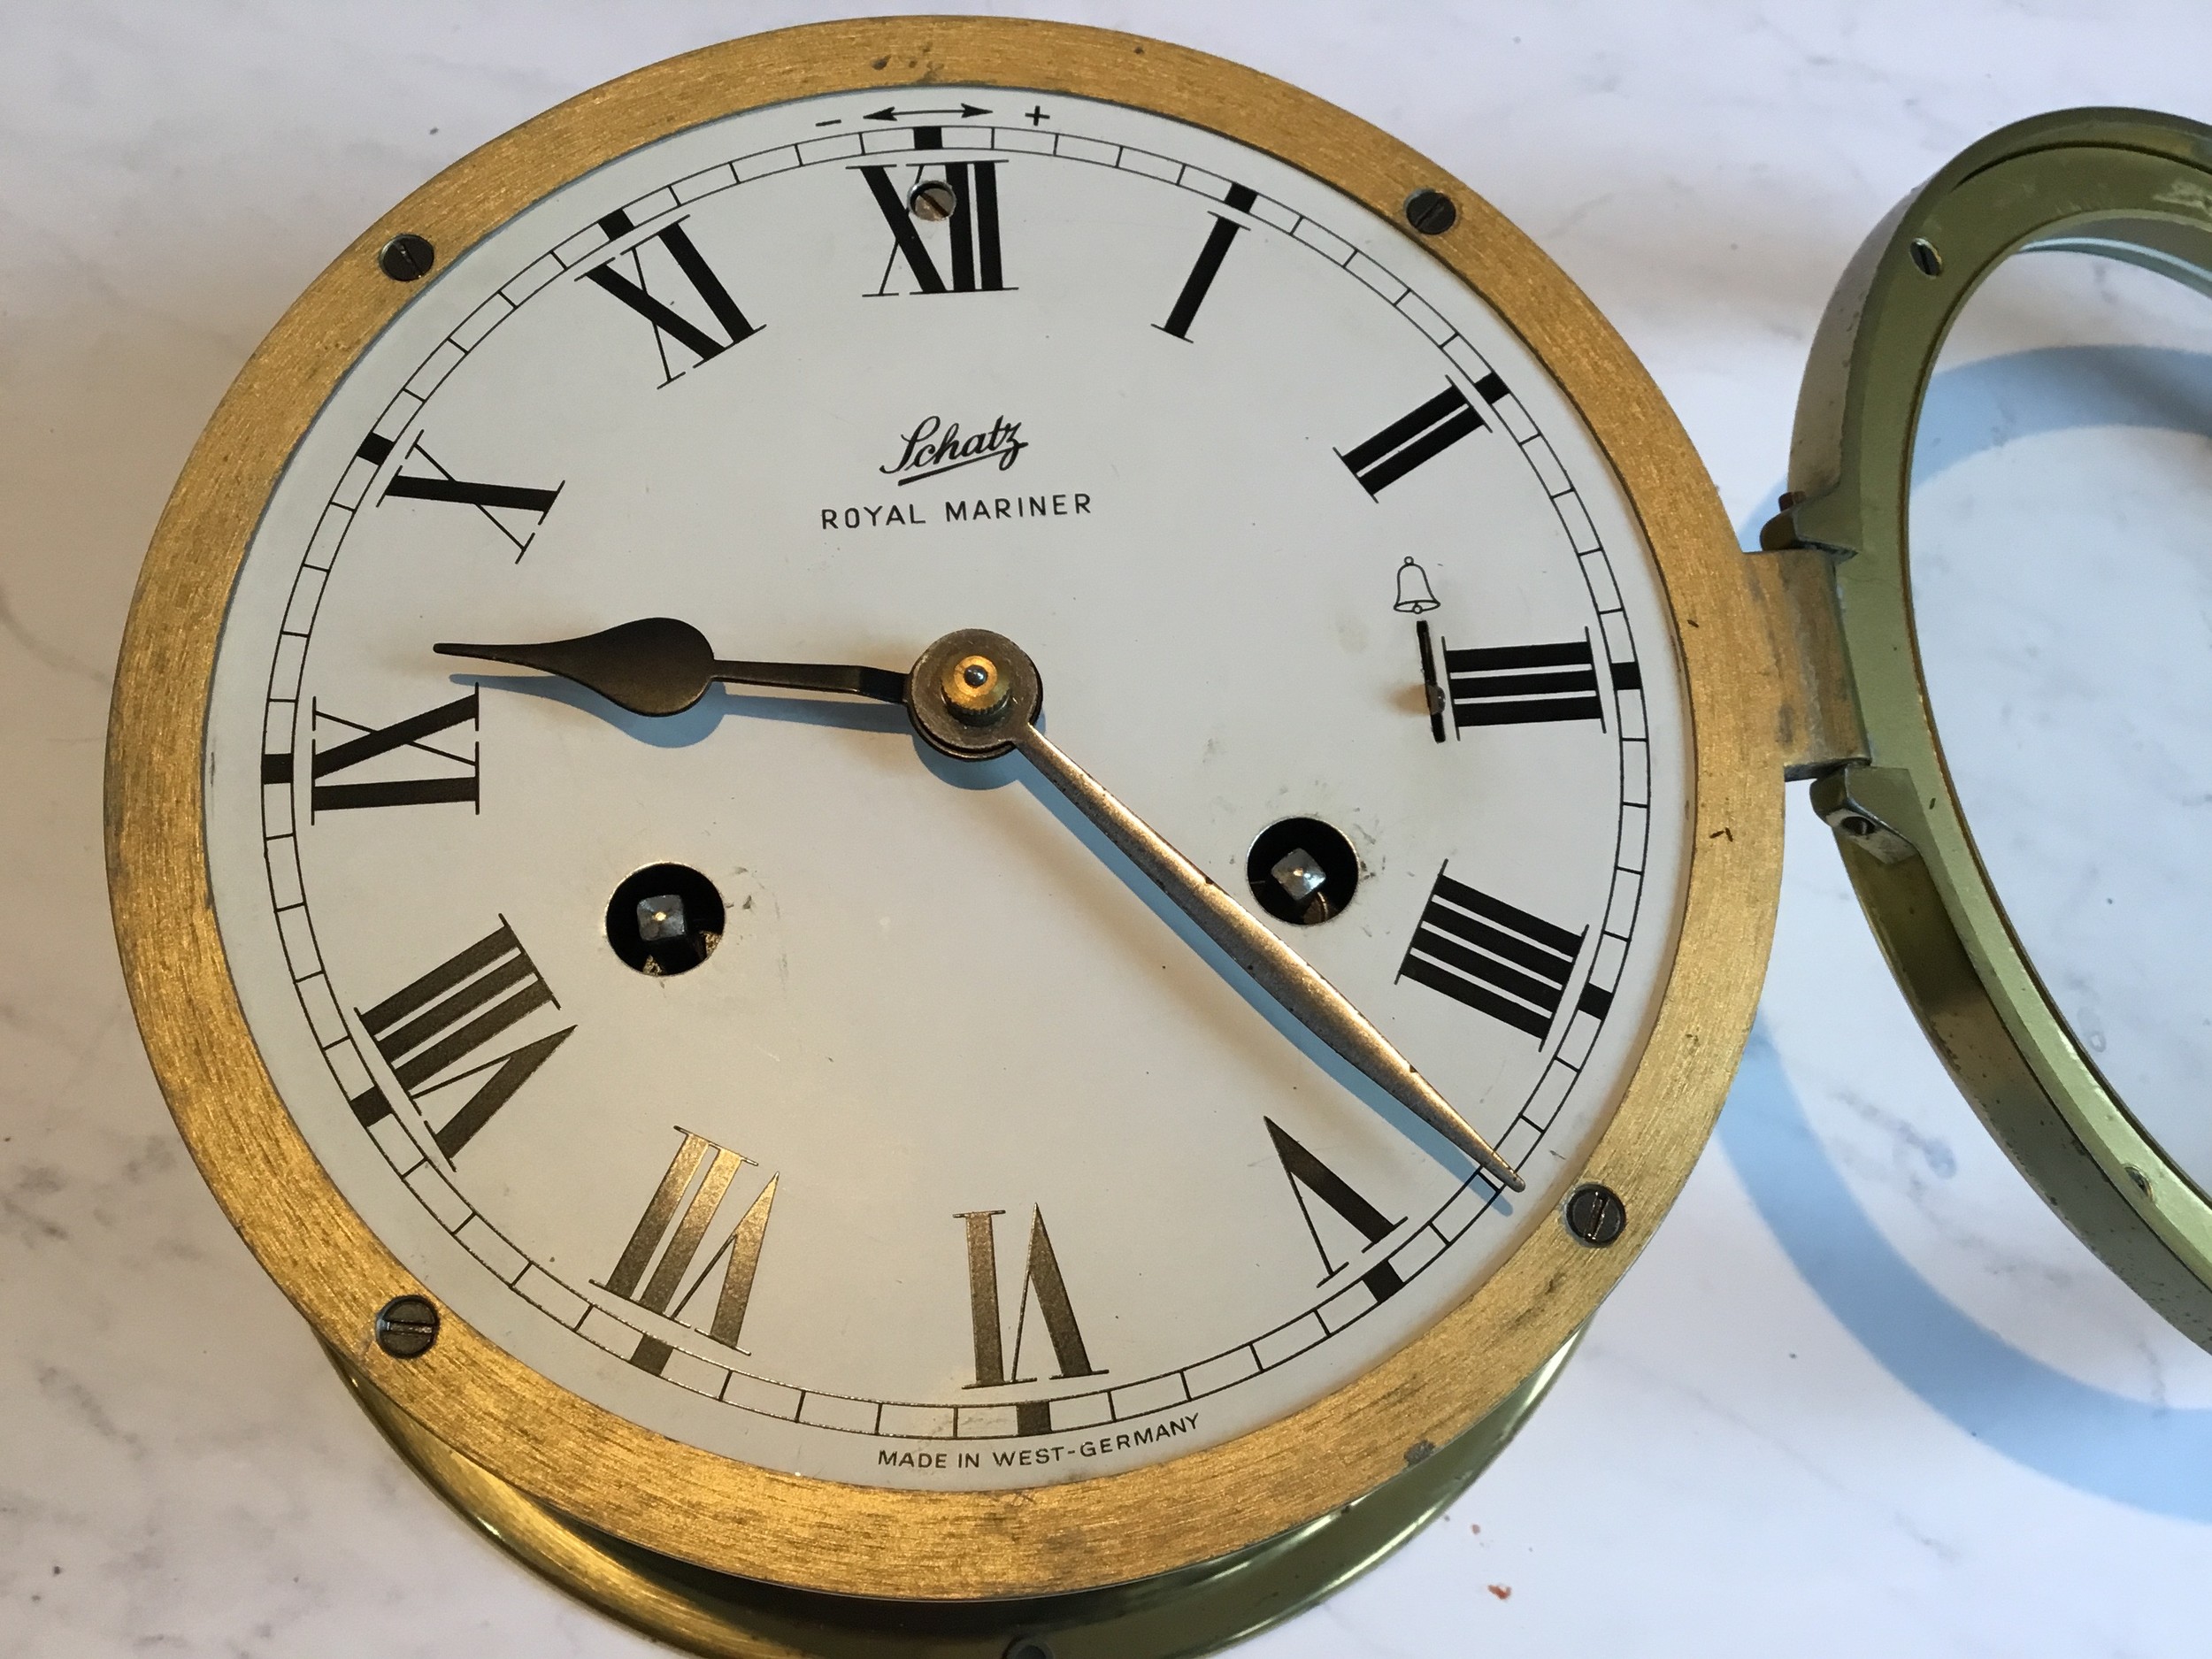 A Schatz Royal Mariner Marine brass clock, twin winding holes, 13cm dial, with Roman numerals, brass - Image 3 of 4